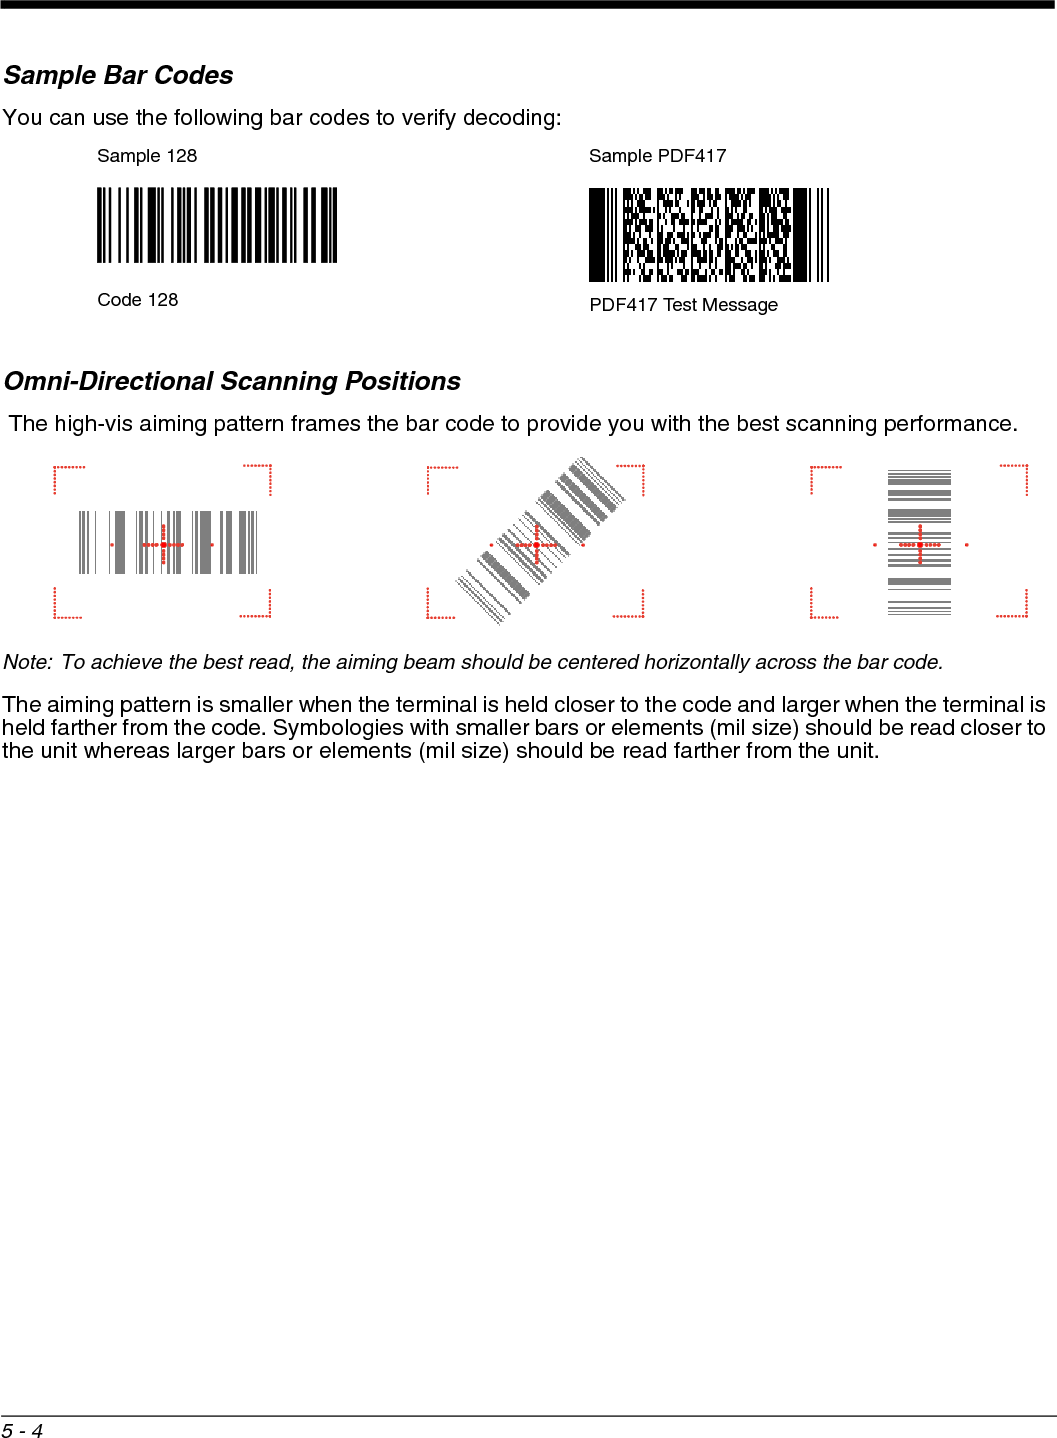 5 - 4Sample Bar CodesYou can use the following bar codes to verify decoding:Omni-Directional Scanning Positions The high-vis aiming pattern frames the bar code to provide you with the best scanning performance. Note: To achieve the best read, the aiming beam should be centered horizontally across the bar code. The aiming pattern is smaller when the terminal is held closer to the code and larger when the terminal is held farther from the code. Symbologies with smaller bars or elements (mil size) should be read closer to the unit whereas larger bars or elements (mil size) should be read farther from the unit.Sample 128 Sample PDF417Code 128 PDF417 Test Message